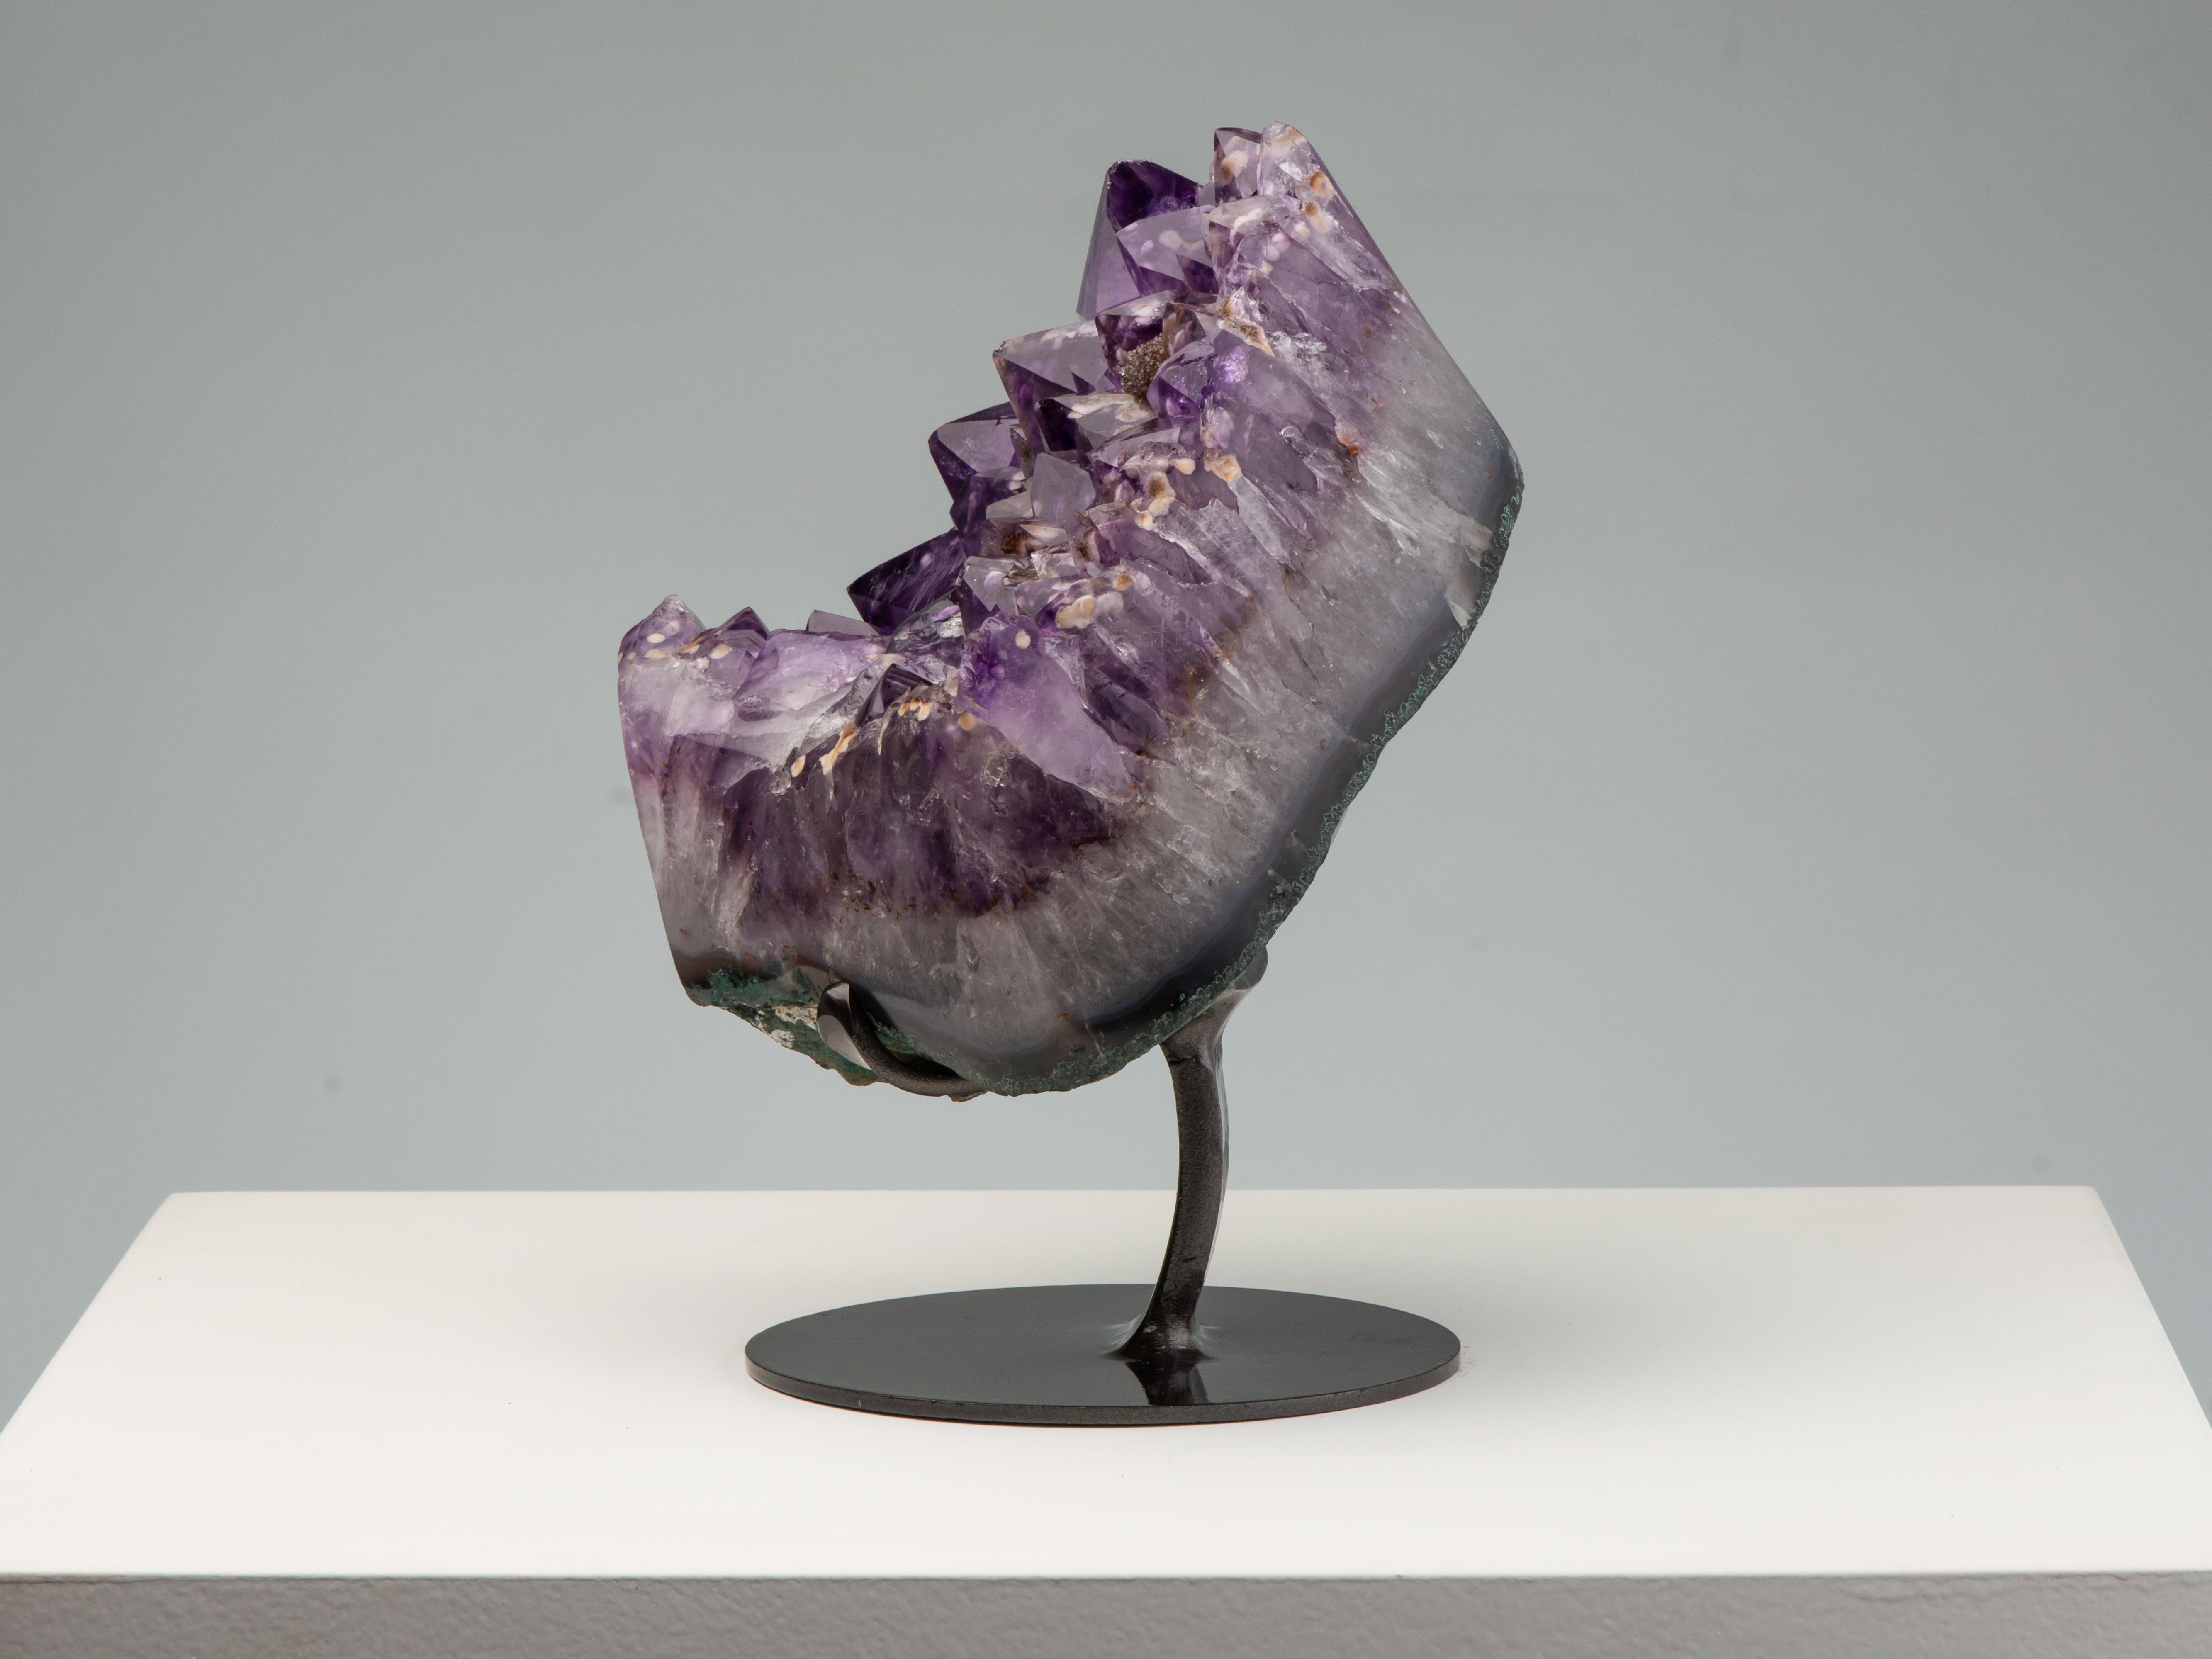 amethyst with goethite inclusions meaning